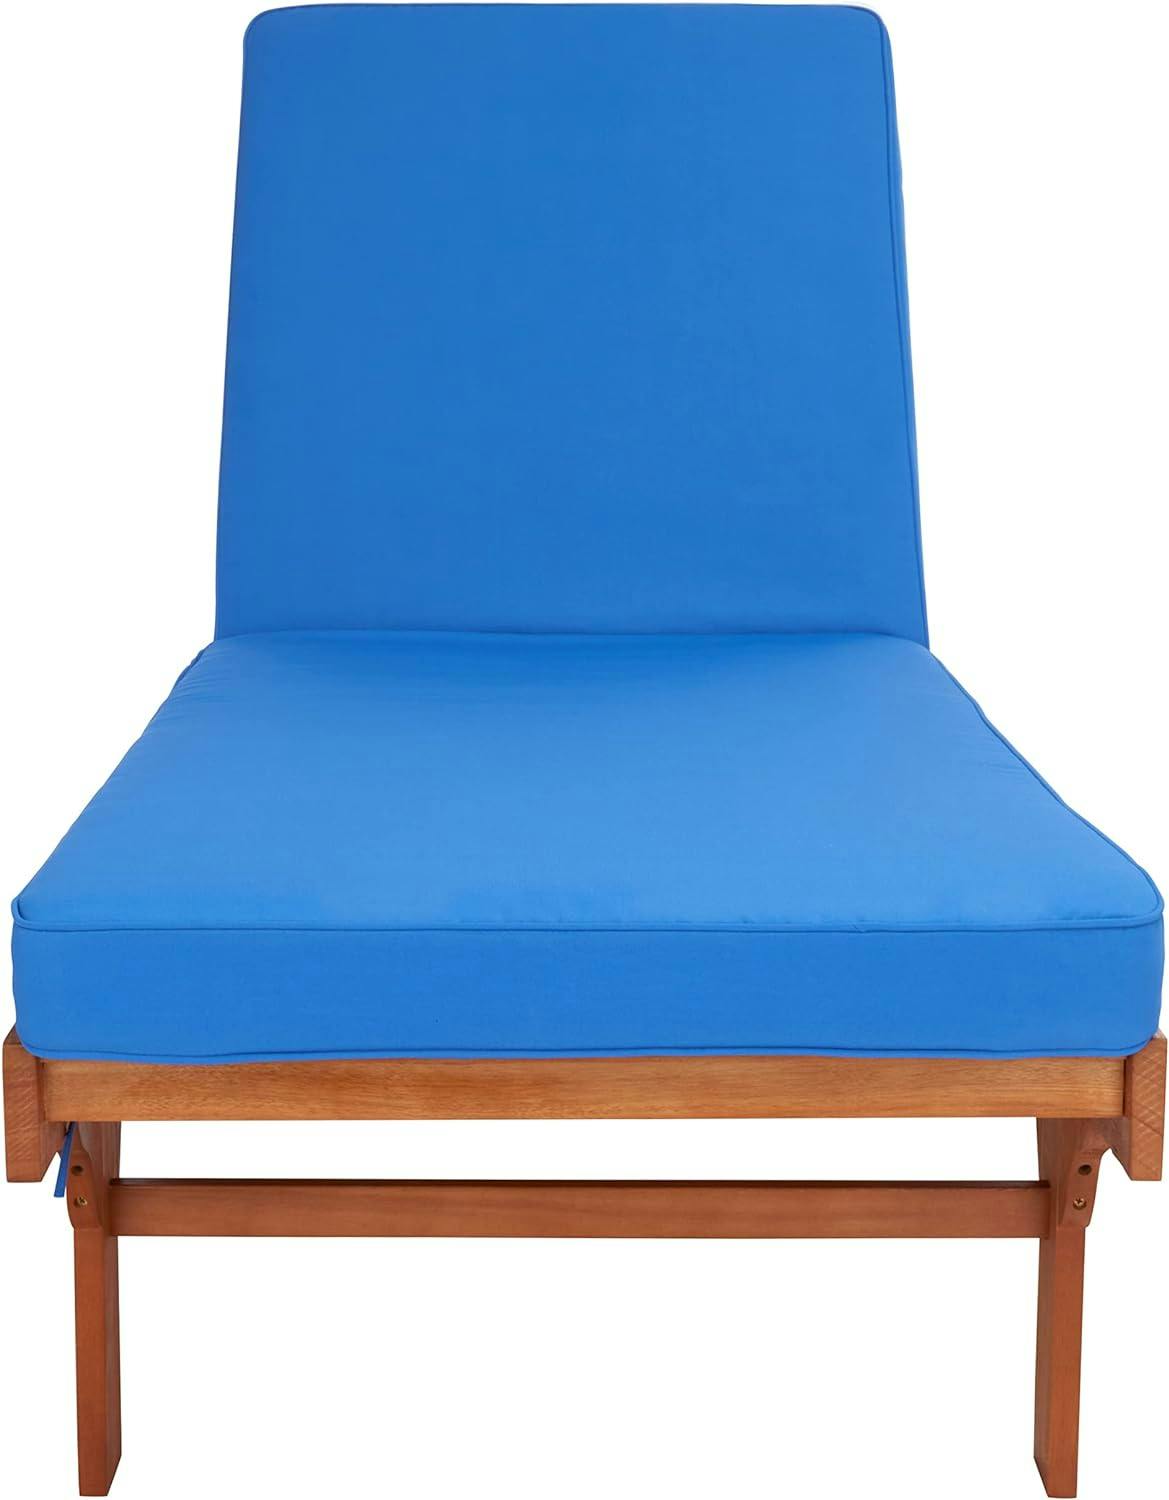 Eucalyptus Wood Newport Chaise Lounge with Royal Blue Cushion and Side Table